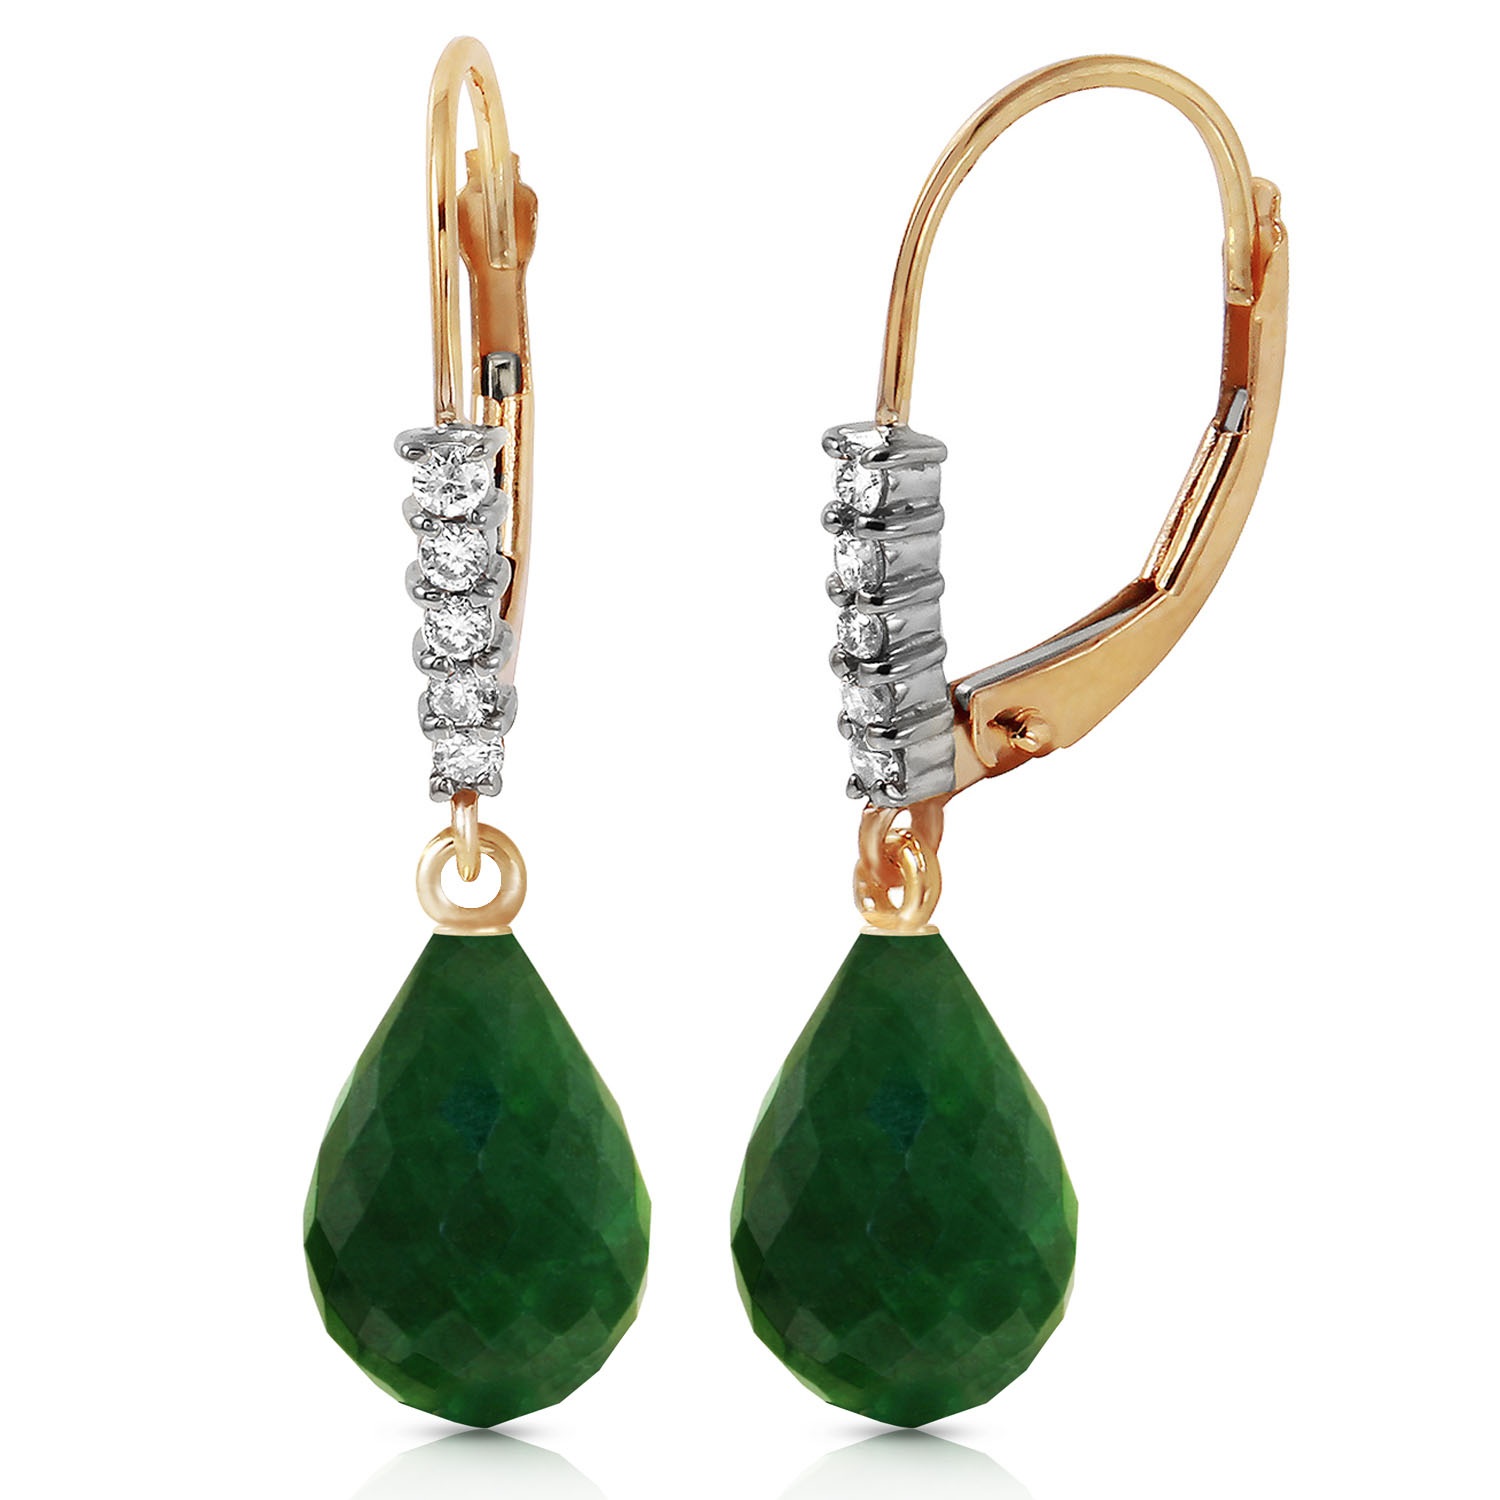 17.75 CTW 14K Solid Gold Leverback Earrings Natural Diamond Emerald | eBay